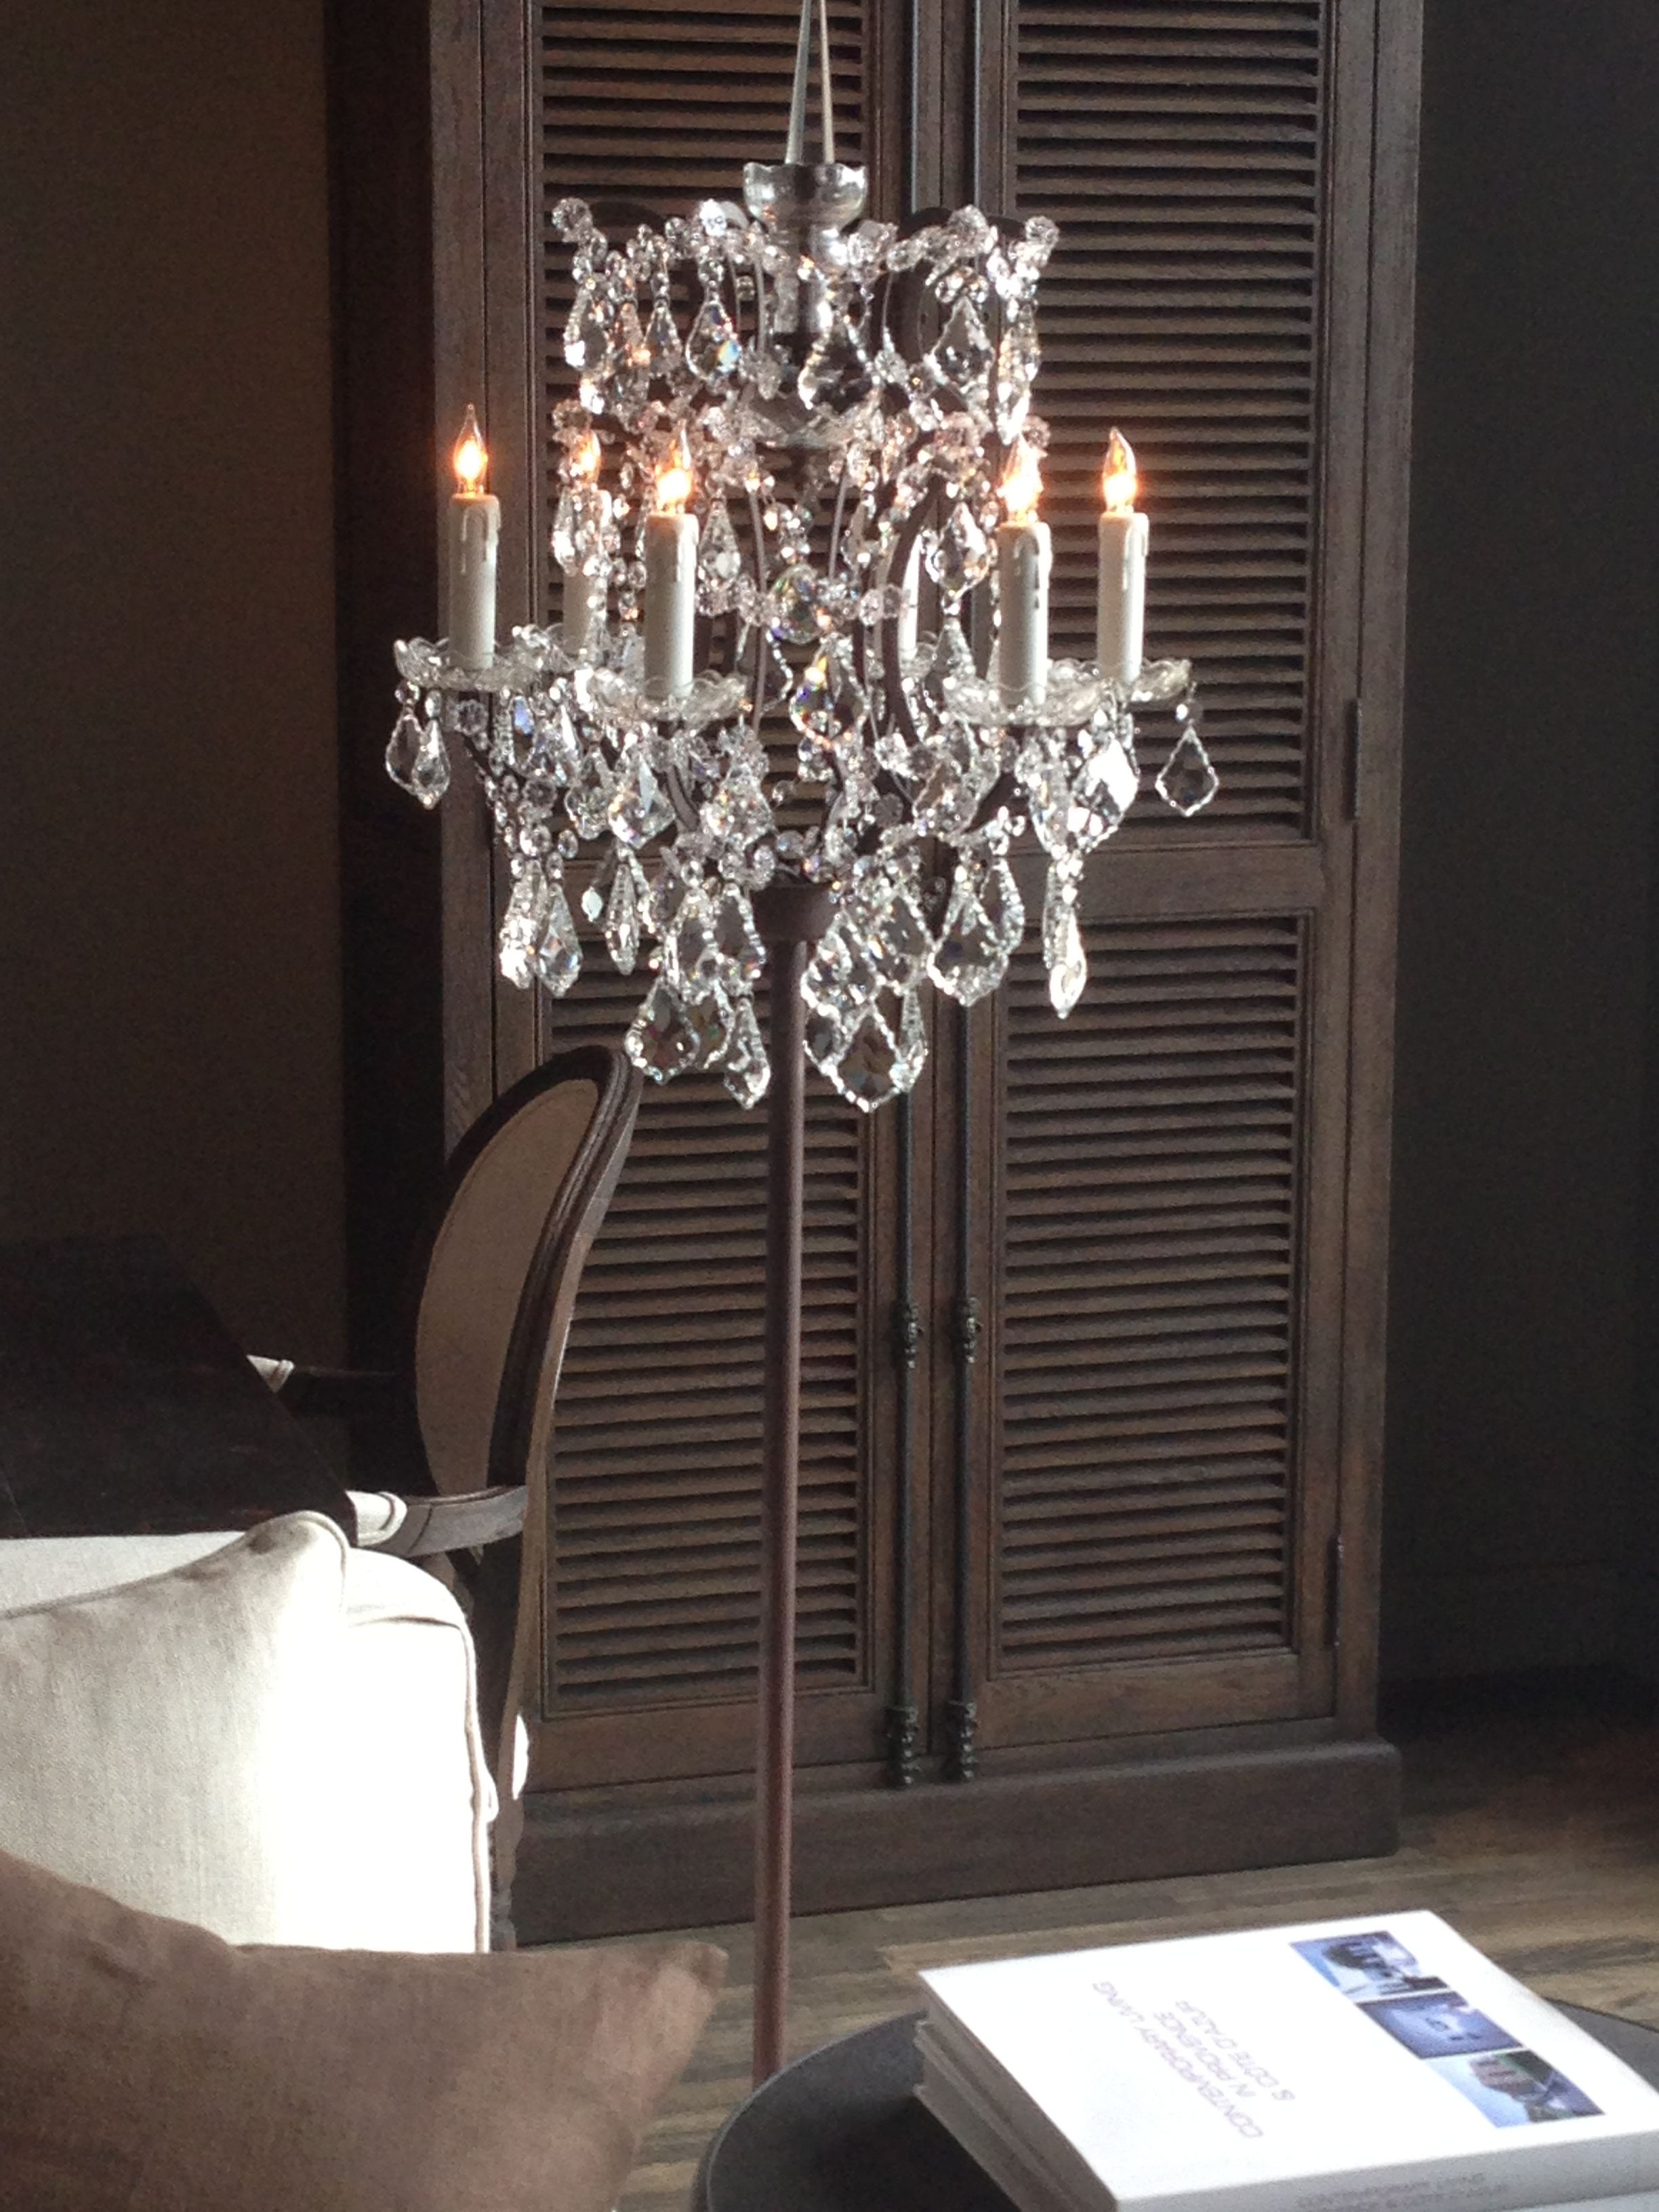 Chandelier Floor Lamp I Own This Floor Lamp And It Is So with regard to dimensions 2448 X 3264